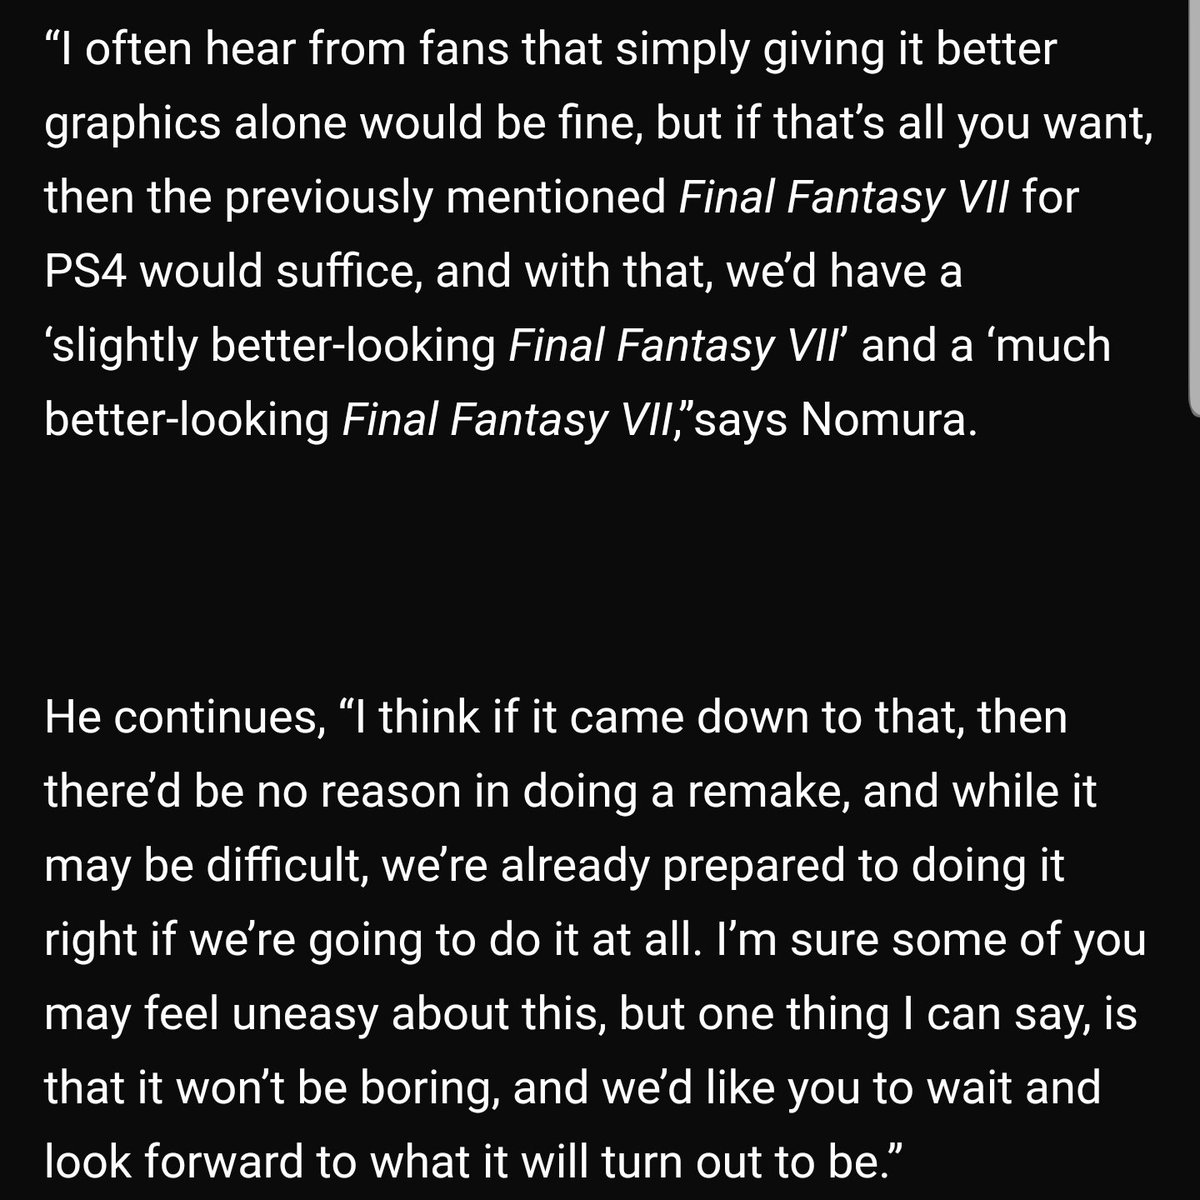 I'm just gonna drop a shitload of Nomura & Kitase quotes about  #FF7R   because maybe some people missed them.(More in comments)